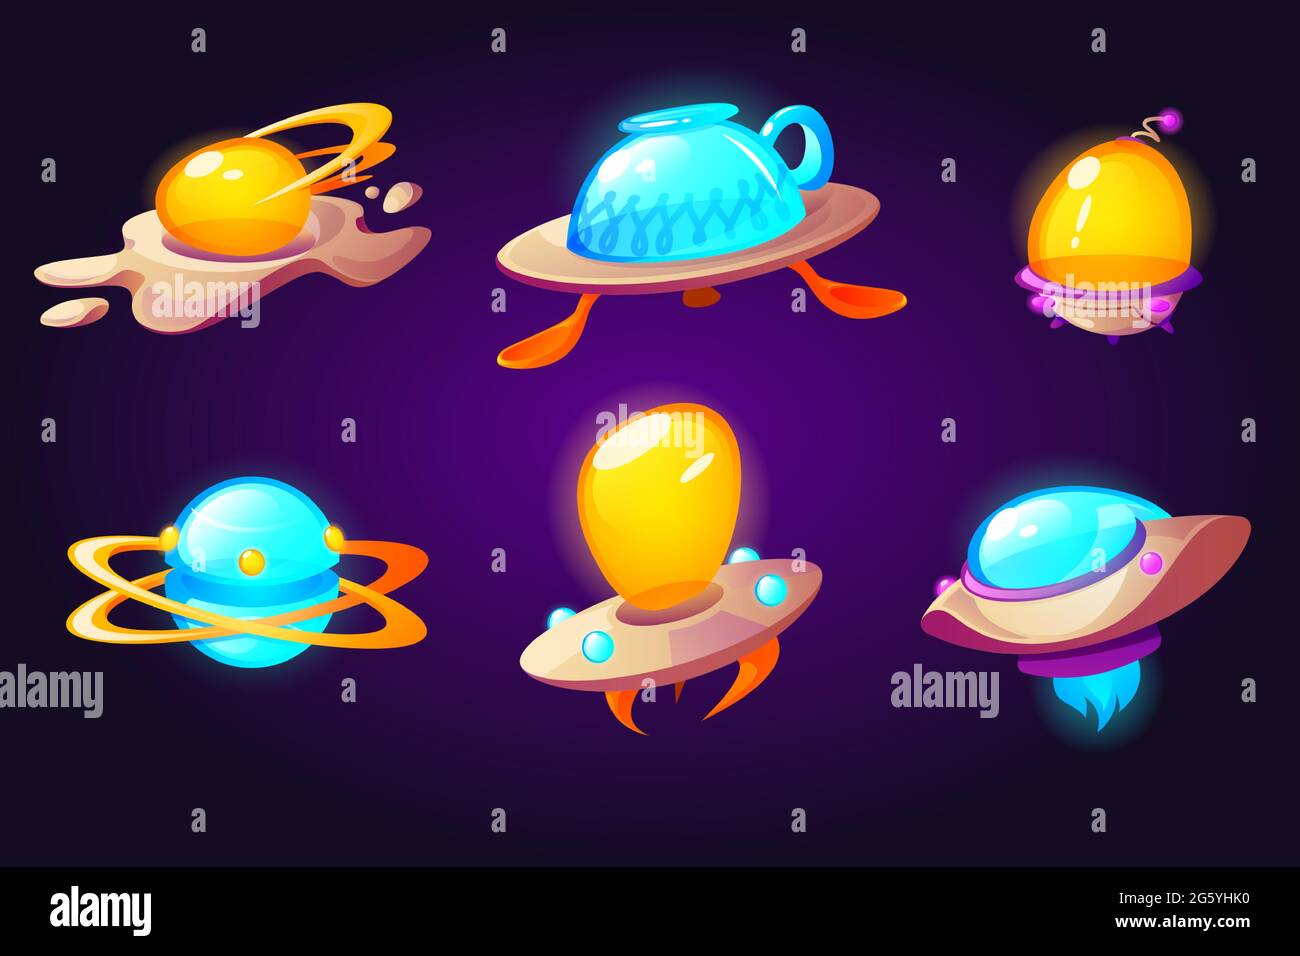 Ufo, alien space ships scrambled eggs, cup and plate with spoons rockets. Fantasy bizarre shuttles, computer game ui graphic design elements, cosmic collection of funny spaceships Cartoon vector set Stock Vector